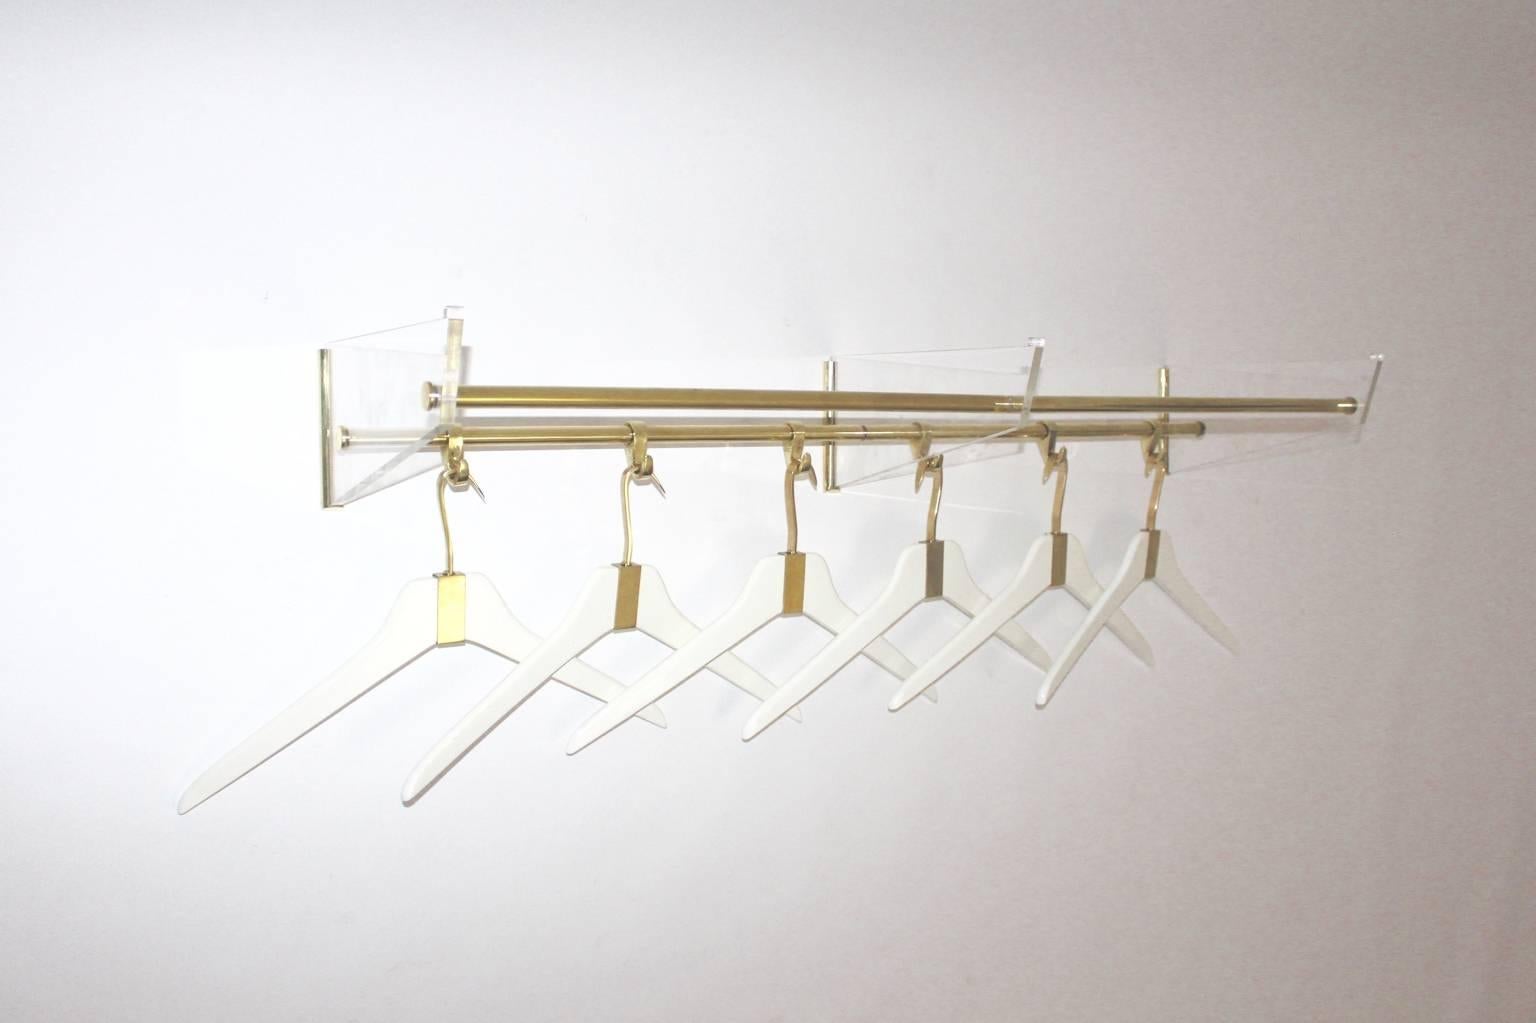 A Mid Century Modern vintage lucite brass coat rack with 6 cloth hangers, which was designed and manufactured Italy 1950s.
Six cloth hangers were made of brass and white lacquered beechwood. 

The brass hardware was carefully cleaned and